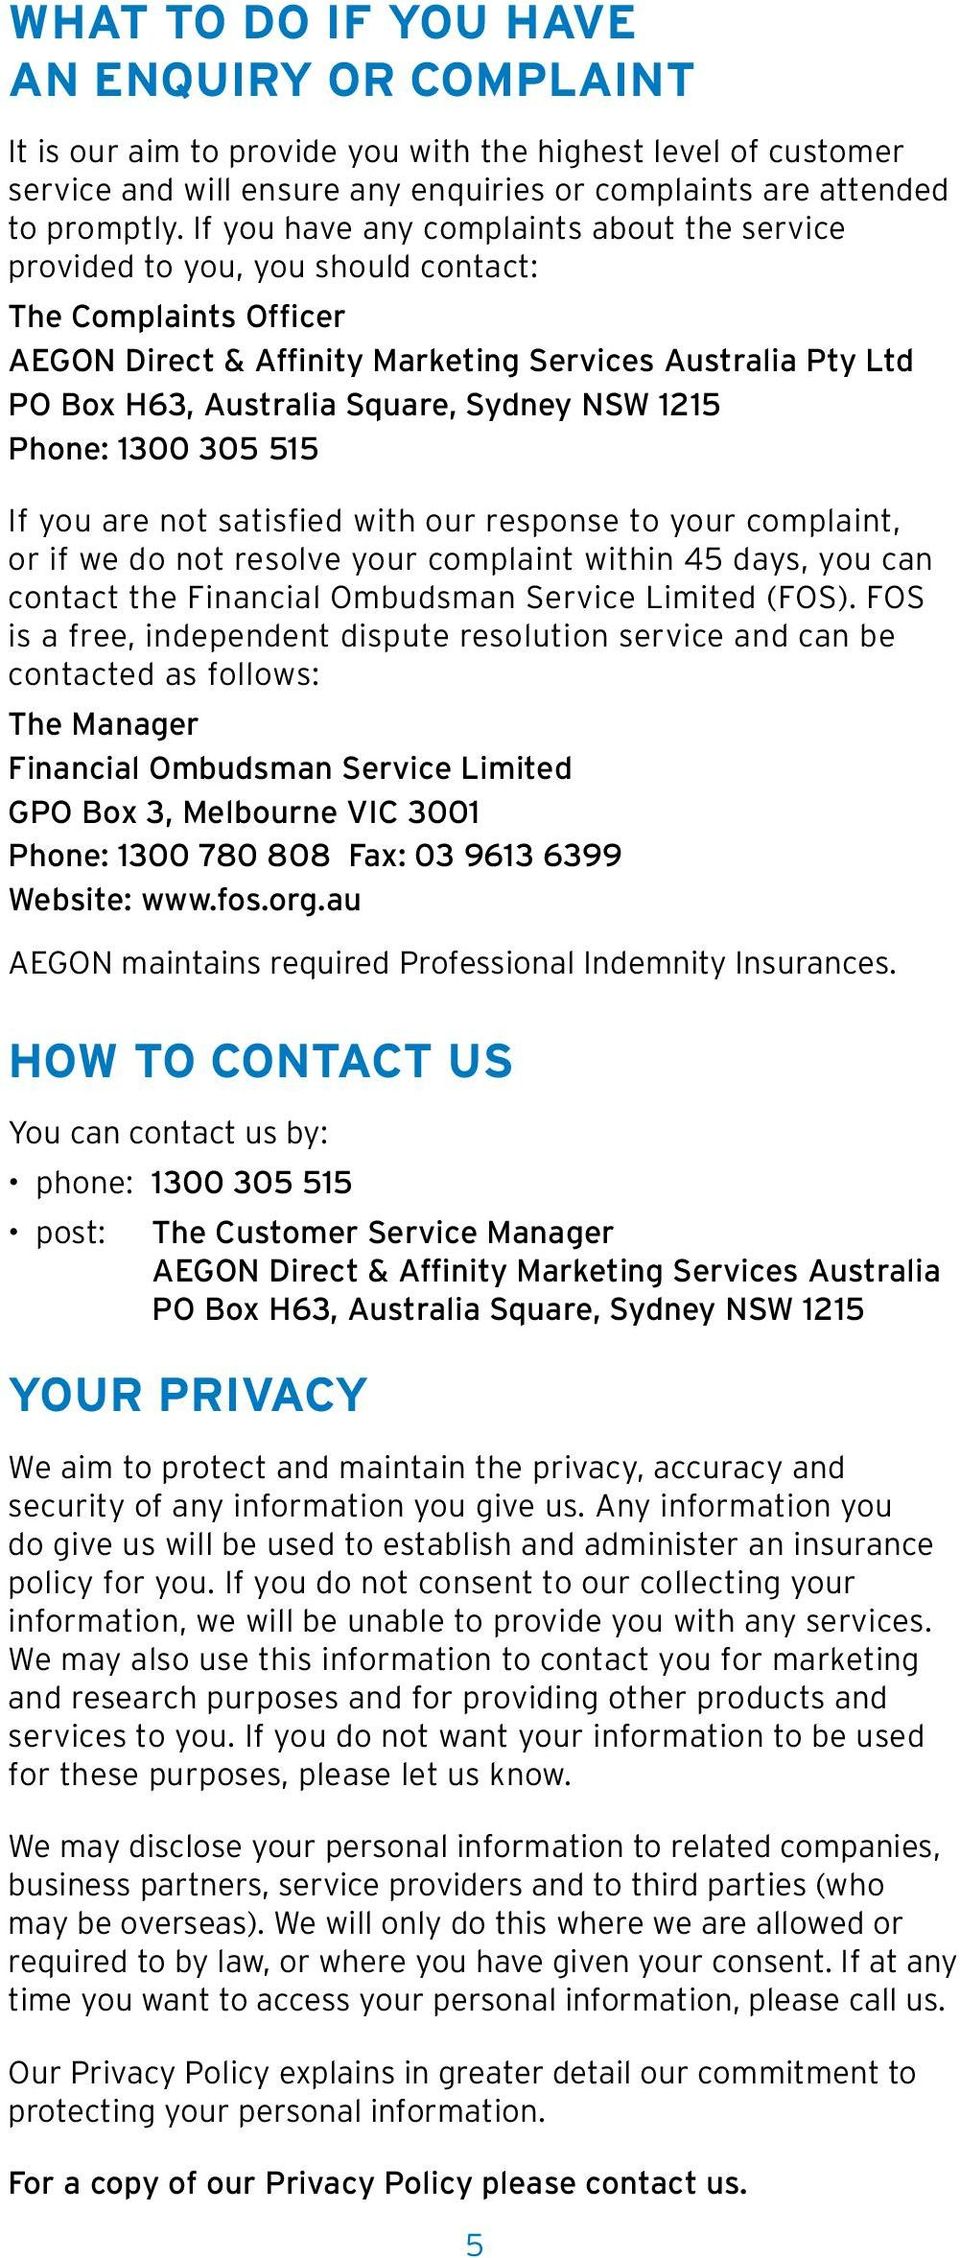 Sydney NSW 1215 Phone: 1300 305 515 If you are not satisfied with our response to your complaint, or if we do not resolve your complaint within 45 days, you can contact the Financial Ombudsman